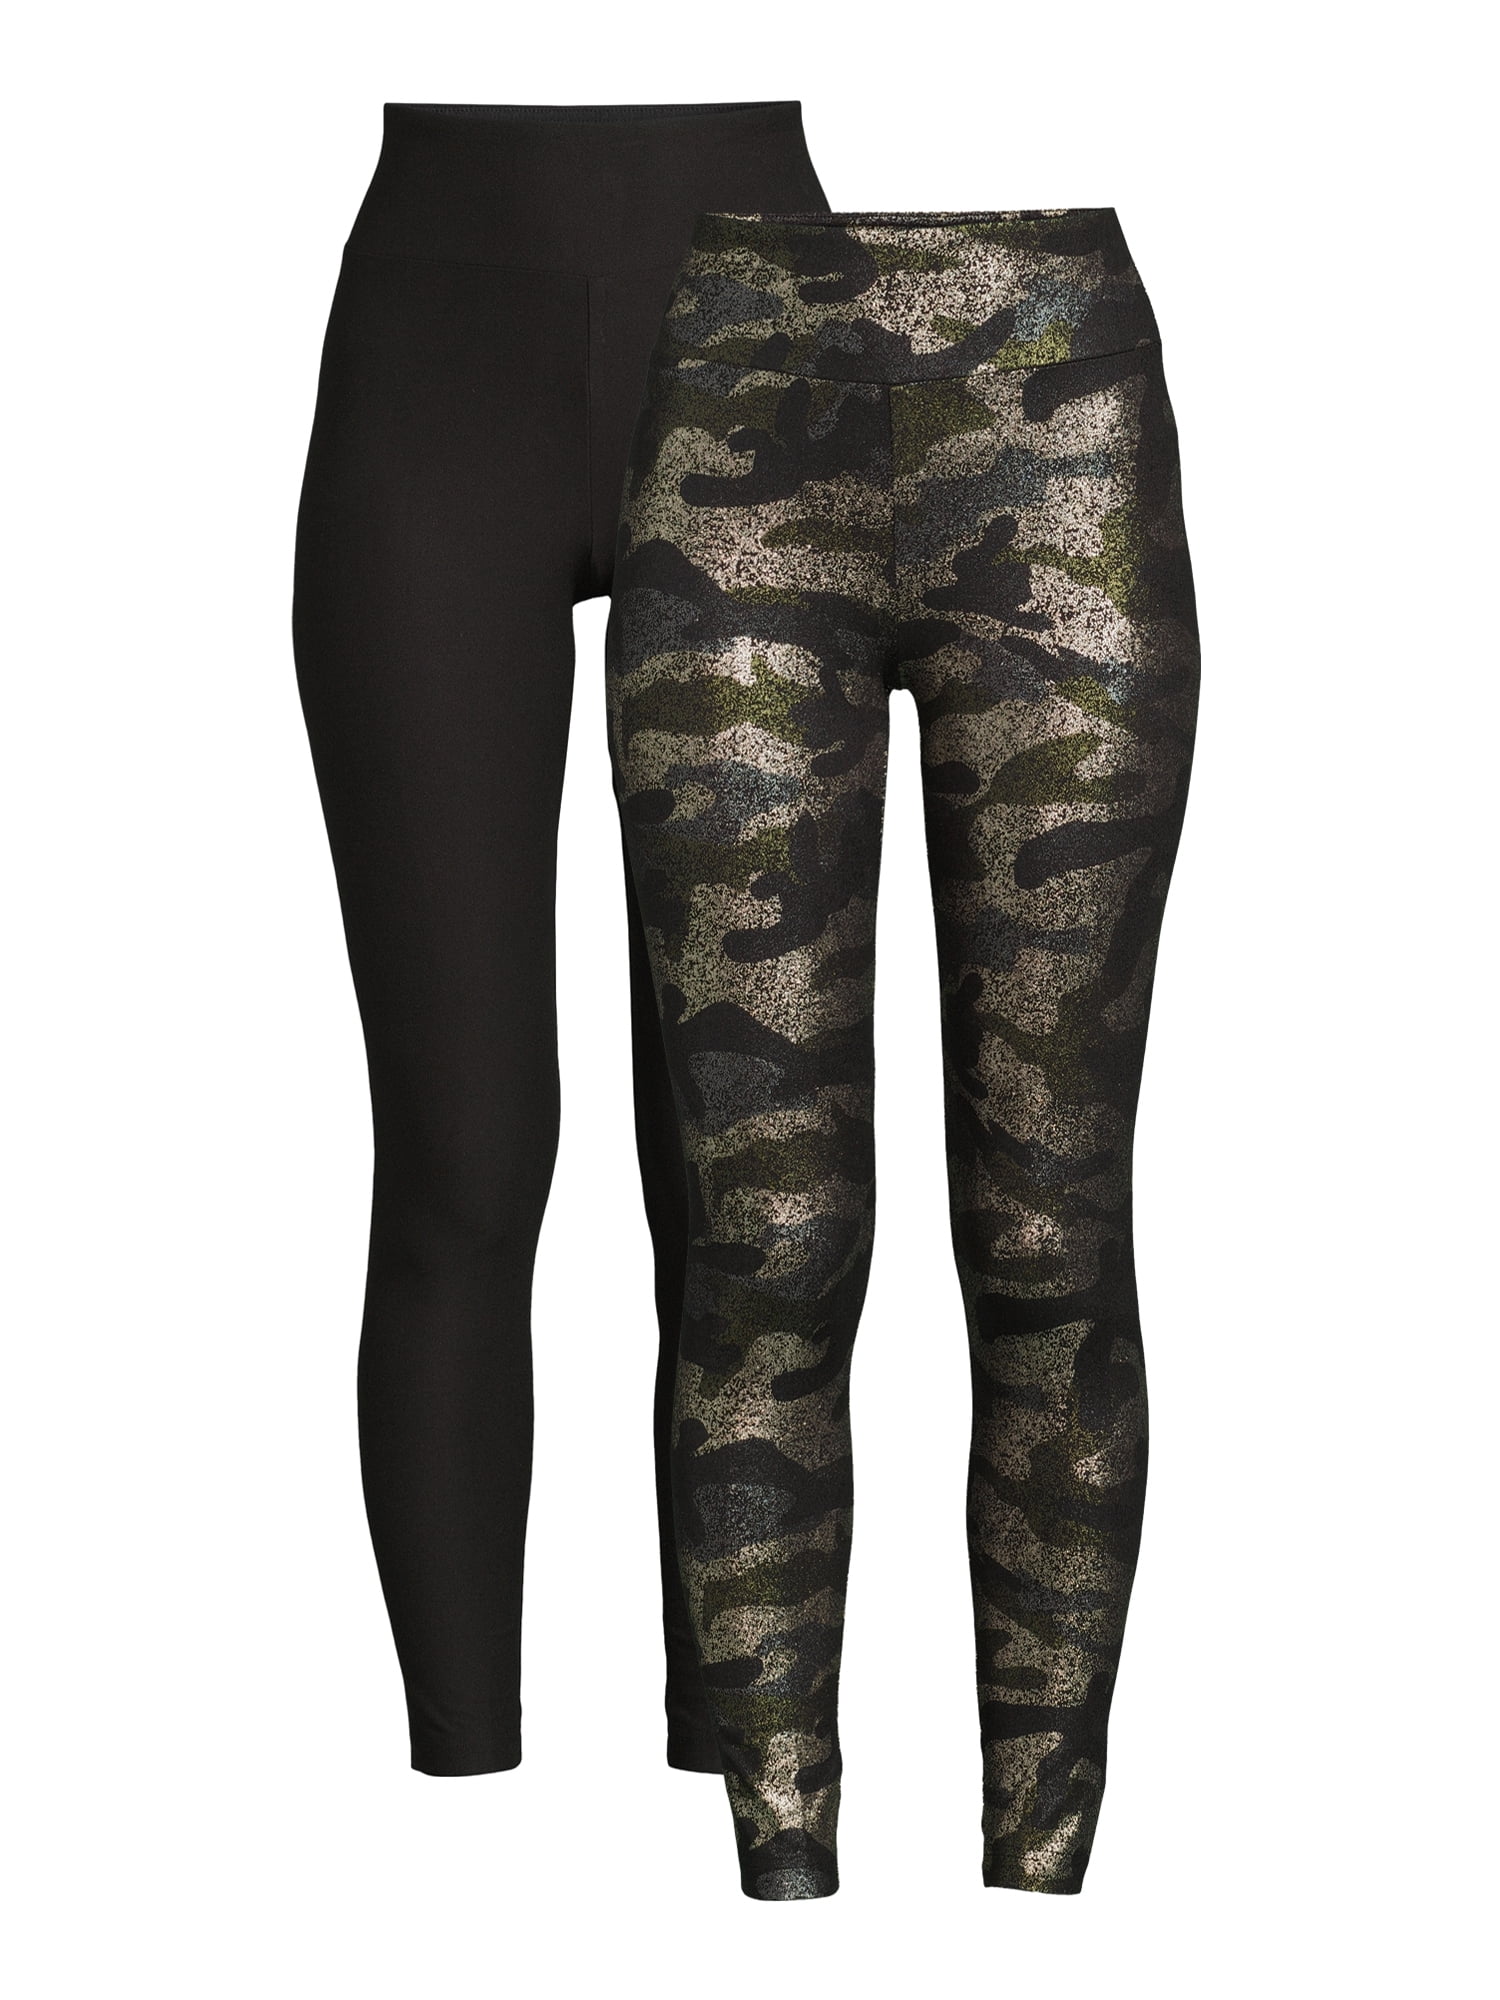 Hunting Plus High Waist Yoga Pants rifle season Gifts for Him Women/'s Camo Leggings by Cozy Spandex gender neutral Buttery